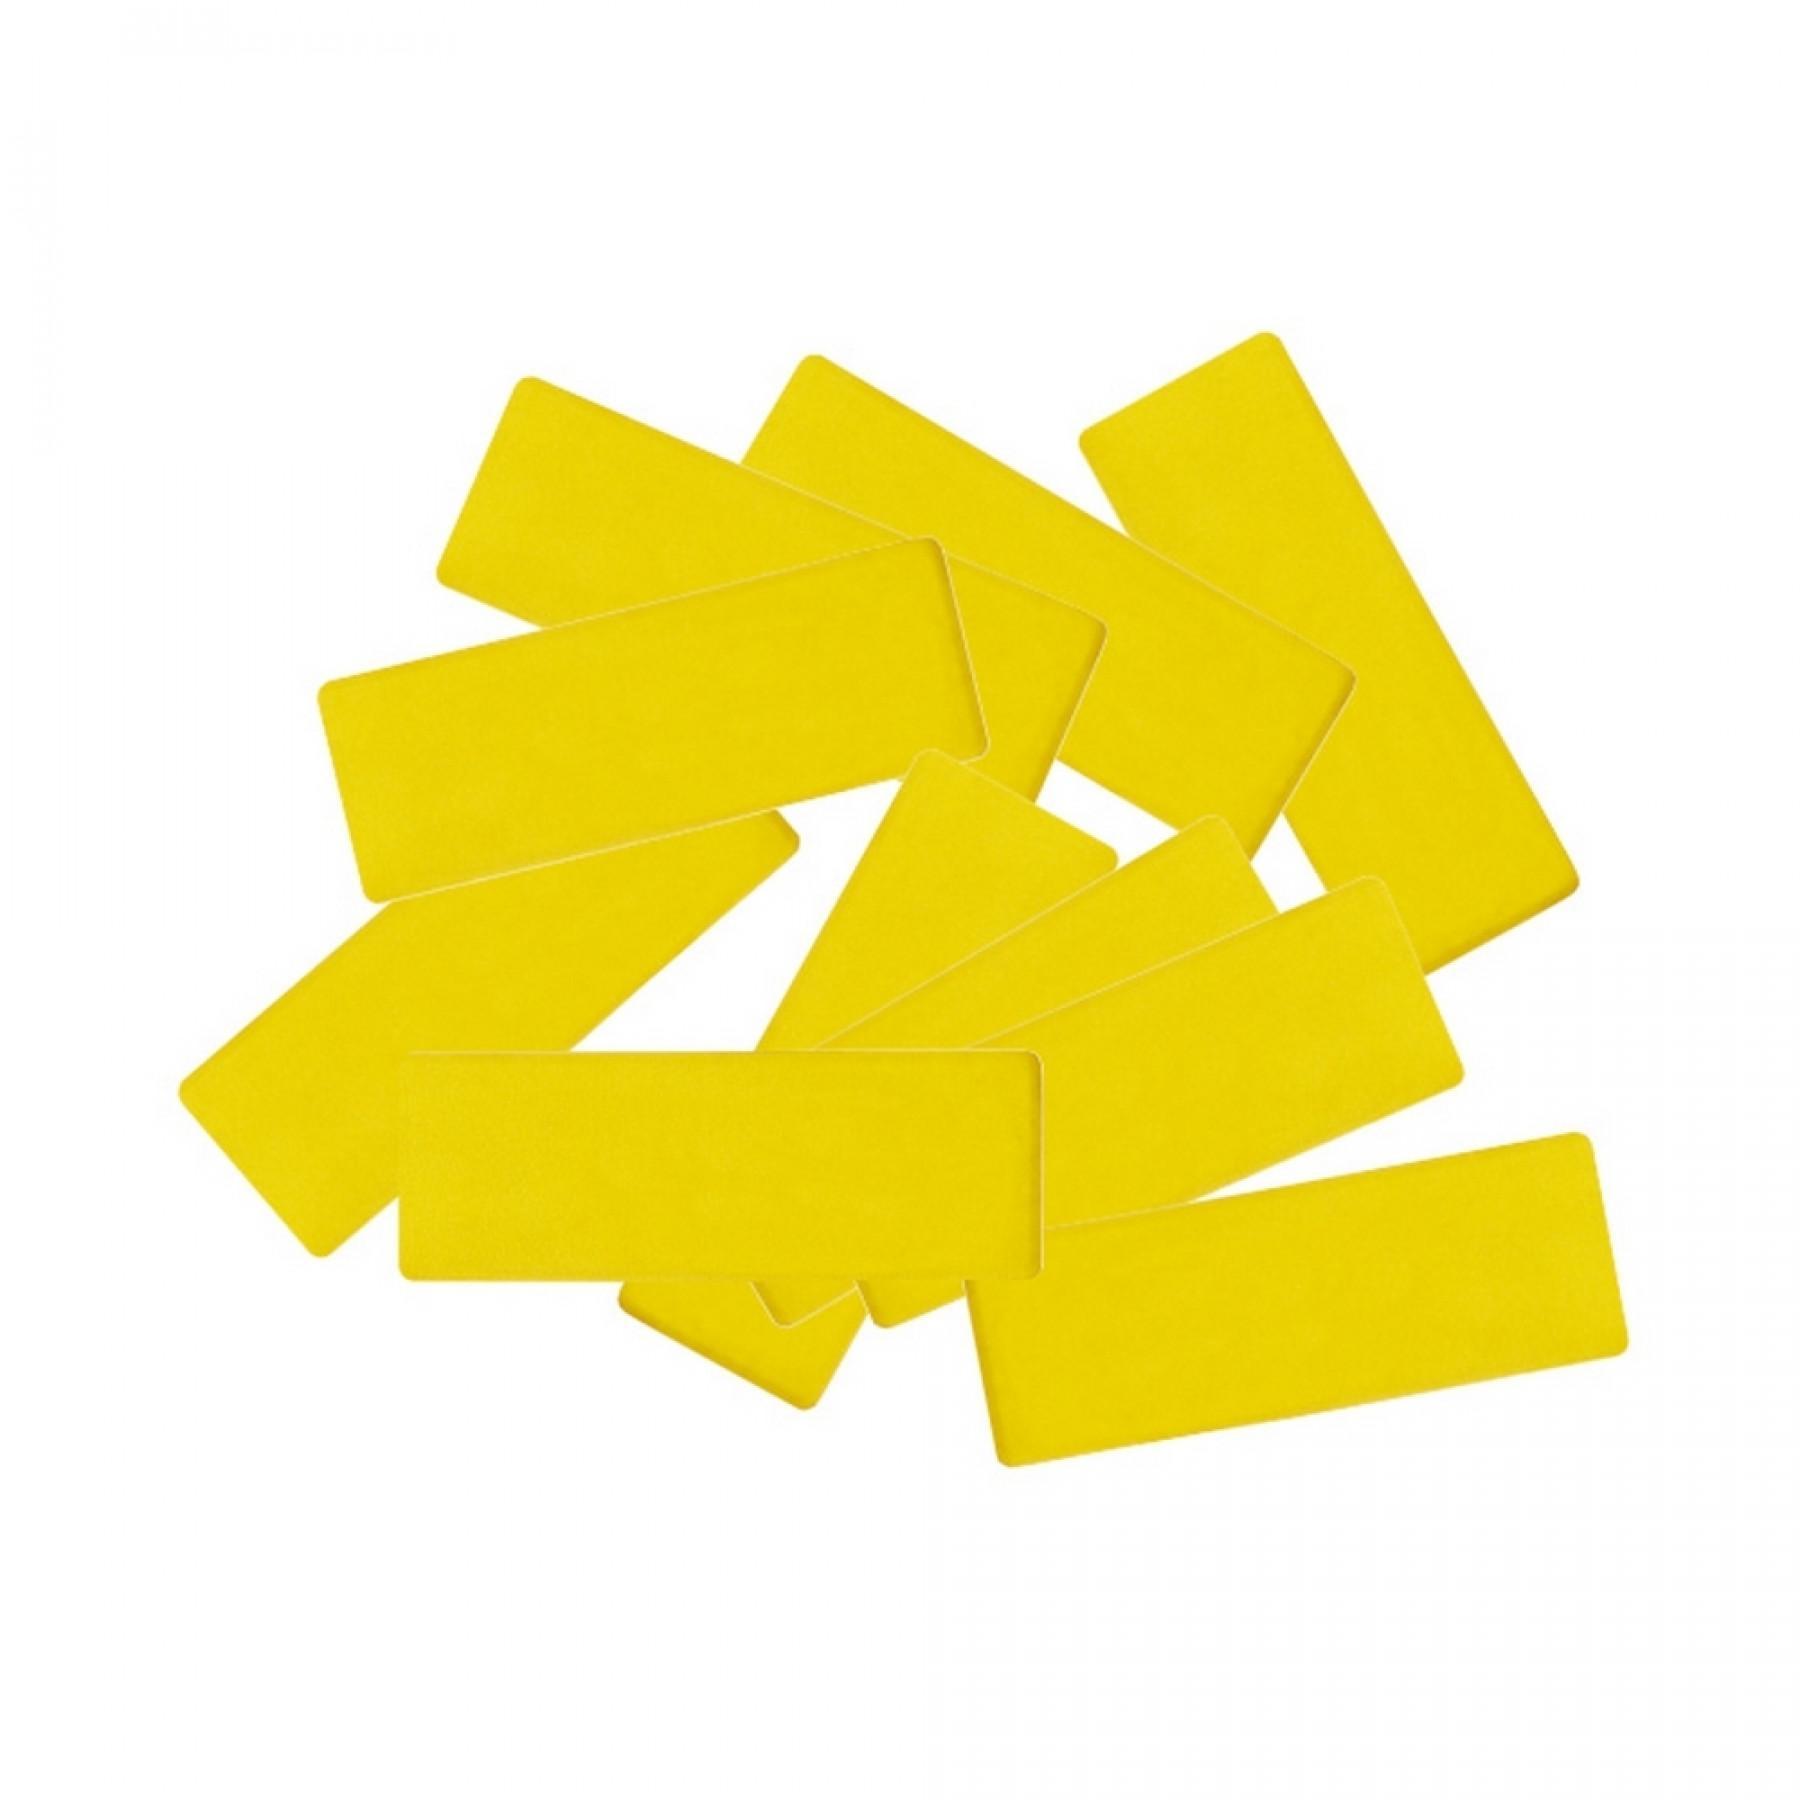 Set of 10 Tremblay marking rectangles